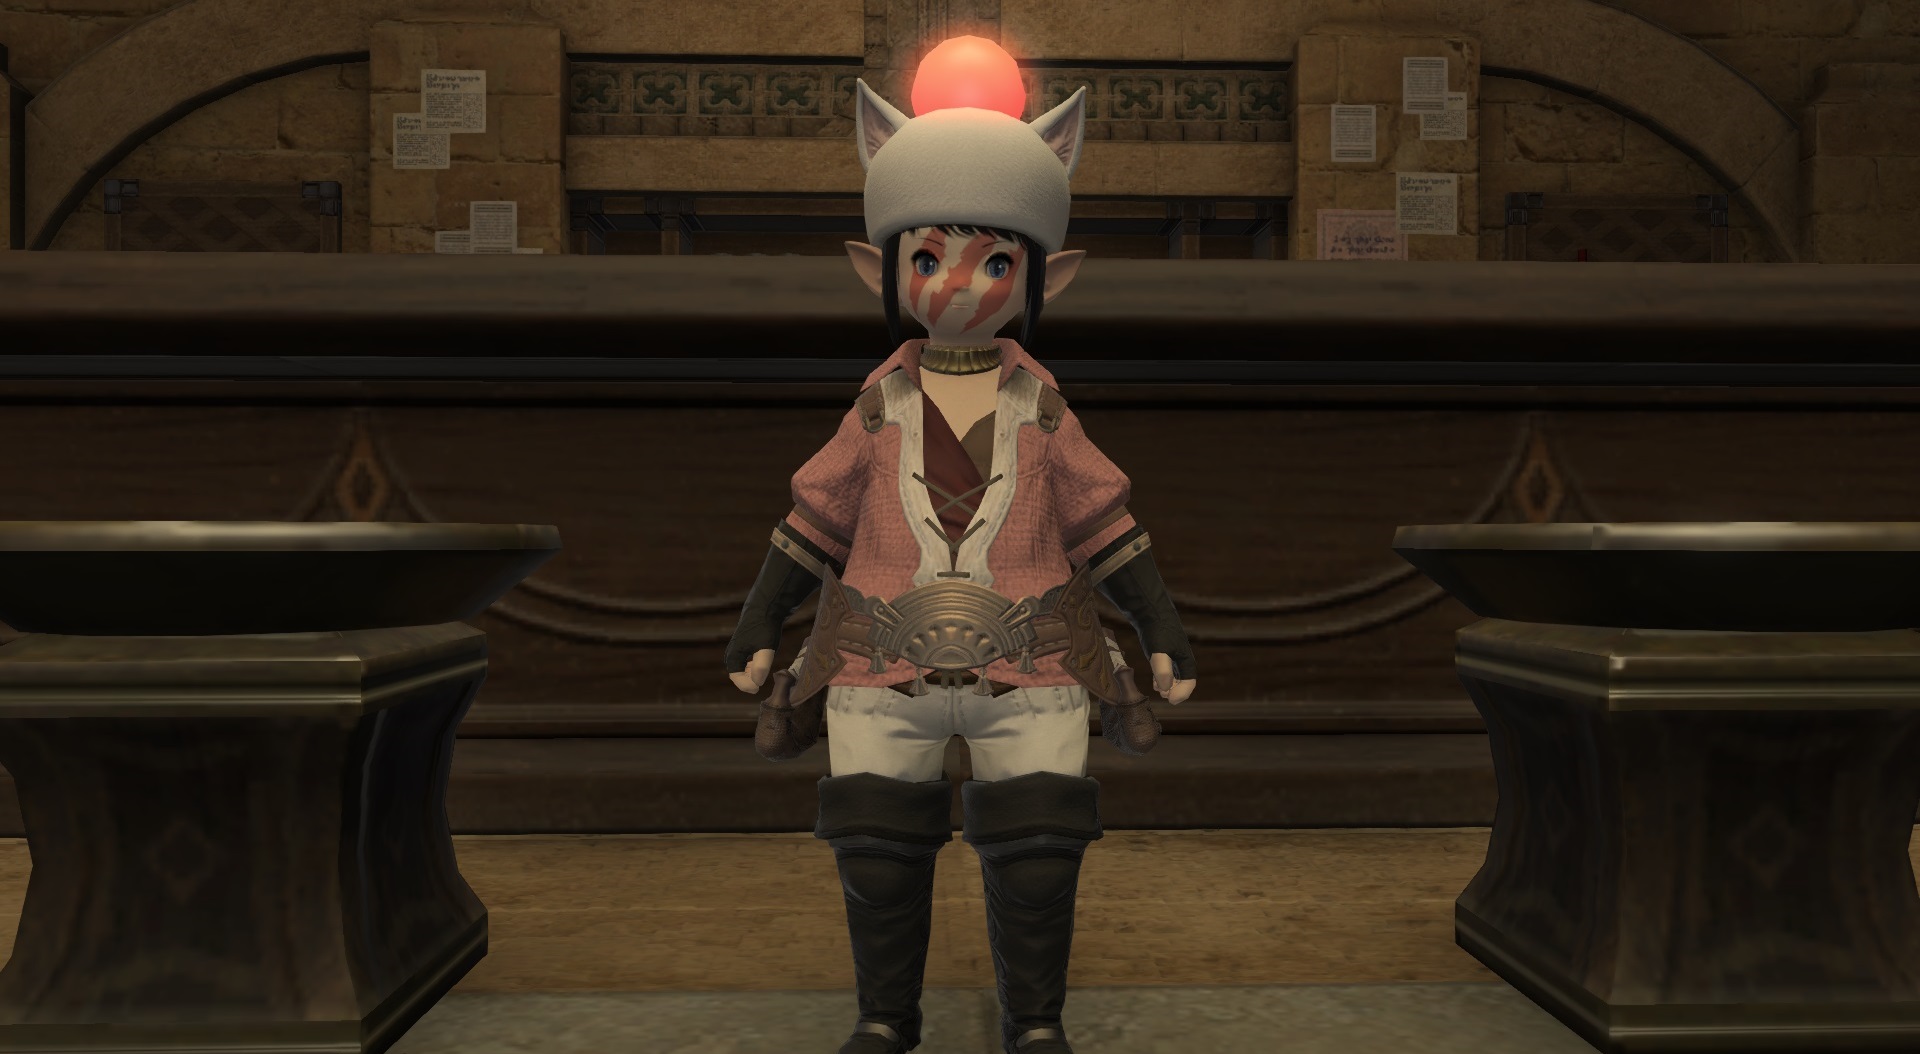 I can't log into Final Fantasy XIV and it's really quite